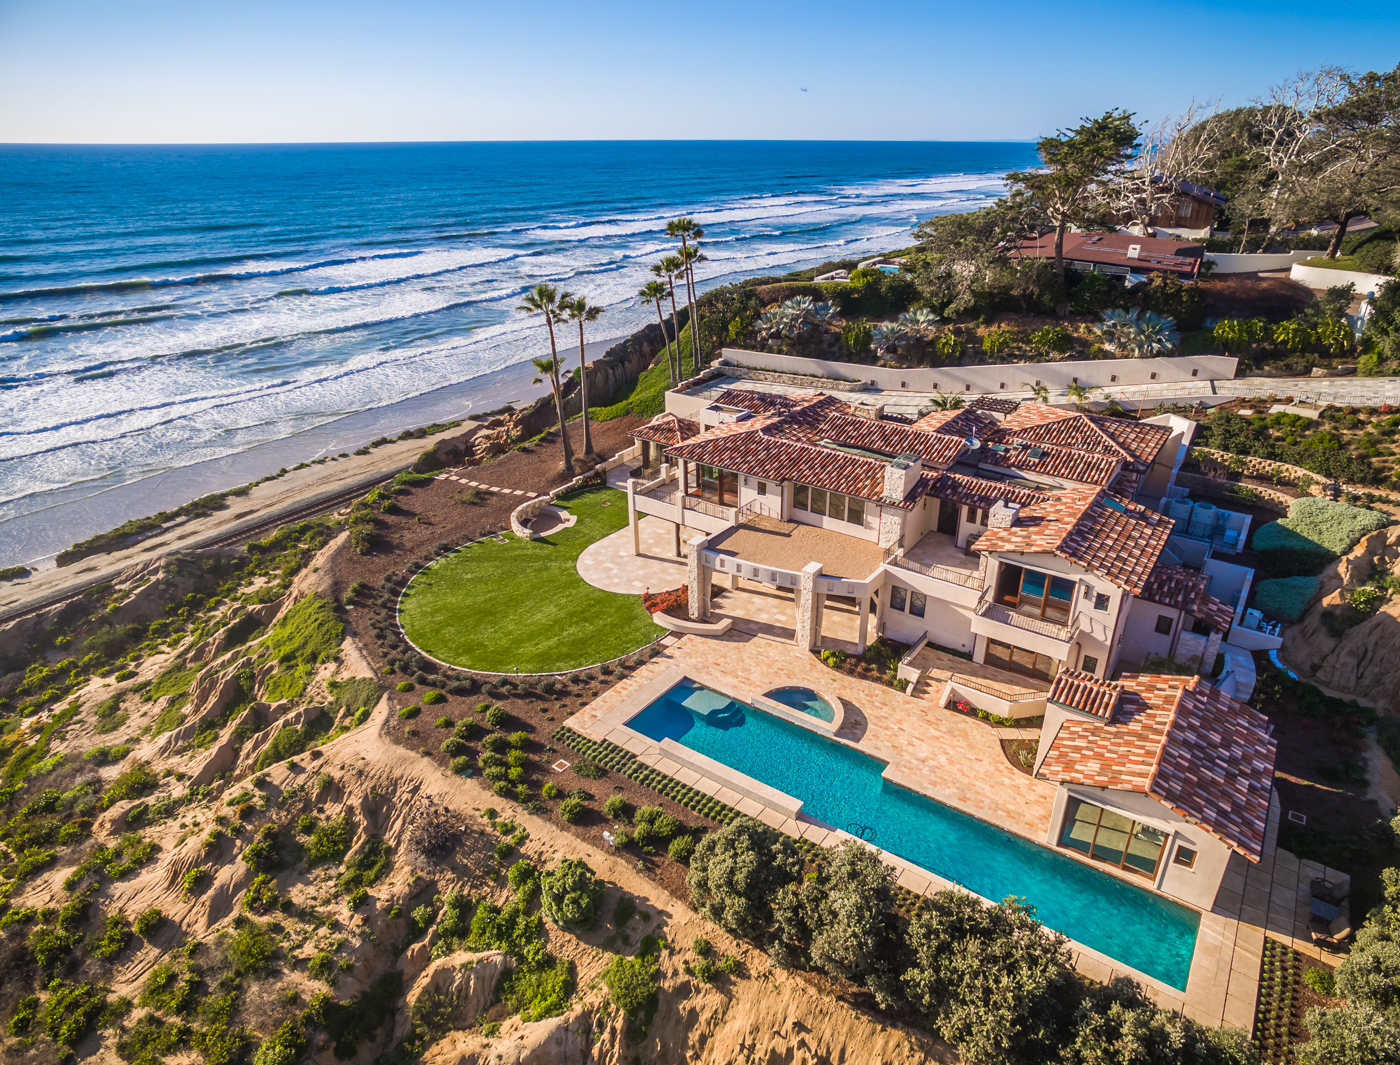 Del Mar home sells for more than 21 million in San Diego housing